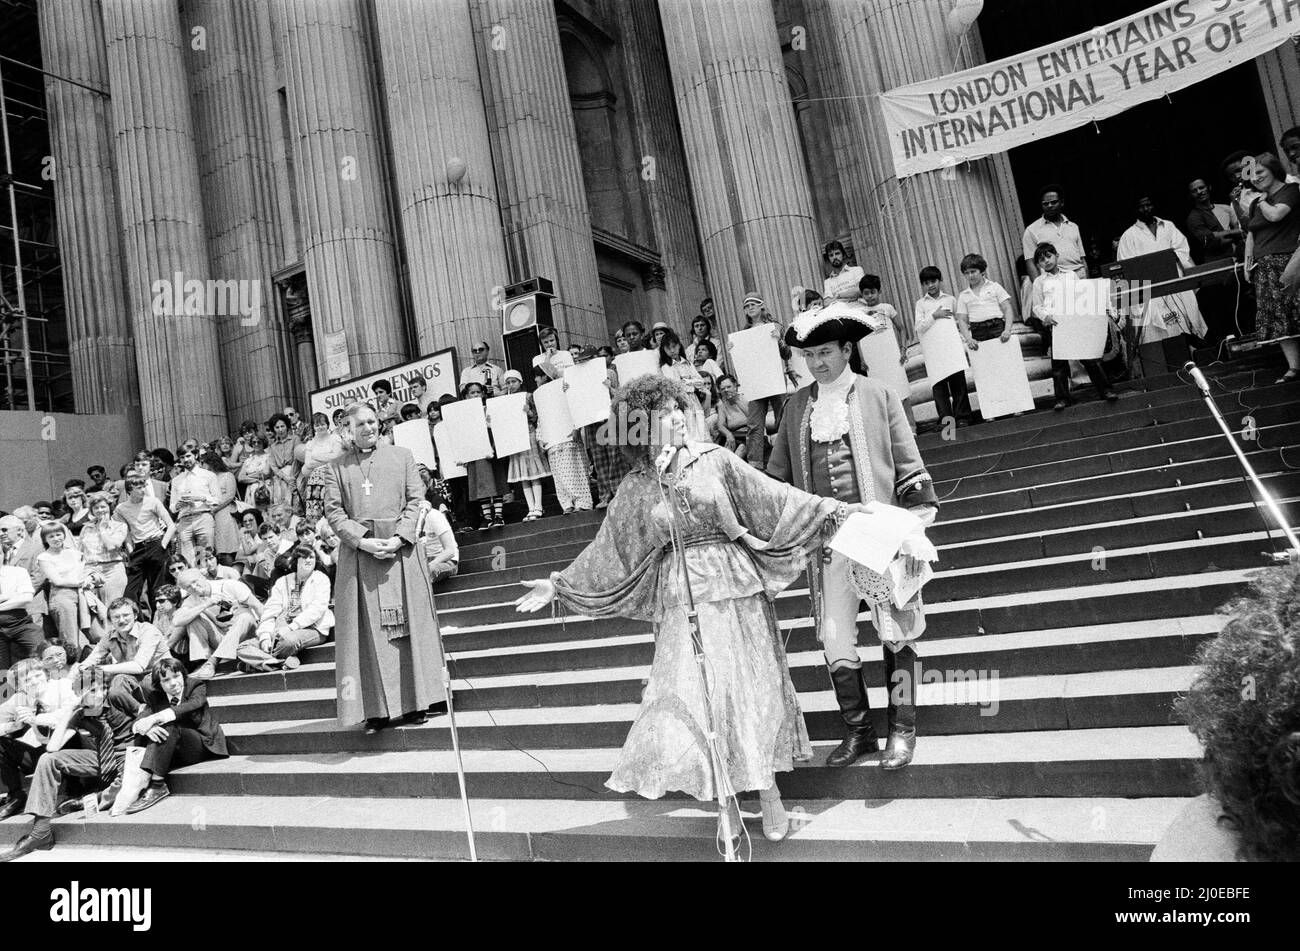 Cleo Laine opens 'London Entertains'. The festival is designed to create a greater appreciation of each others cultures for the people of London and to remind them of the centuries old reputation of the city as a meeting place for people from many parts of the world. Cleo Laine and the Bishop of Stepney, Jim Thompson welcome the crowds. 13th July 1979. Stock Photo